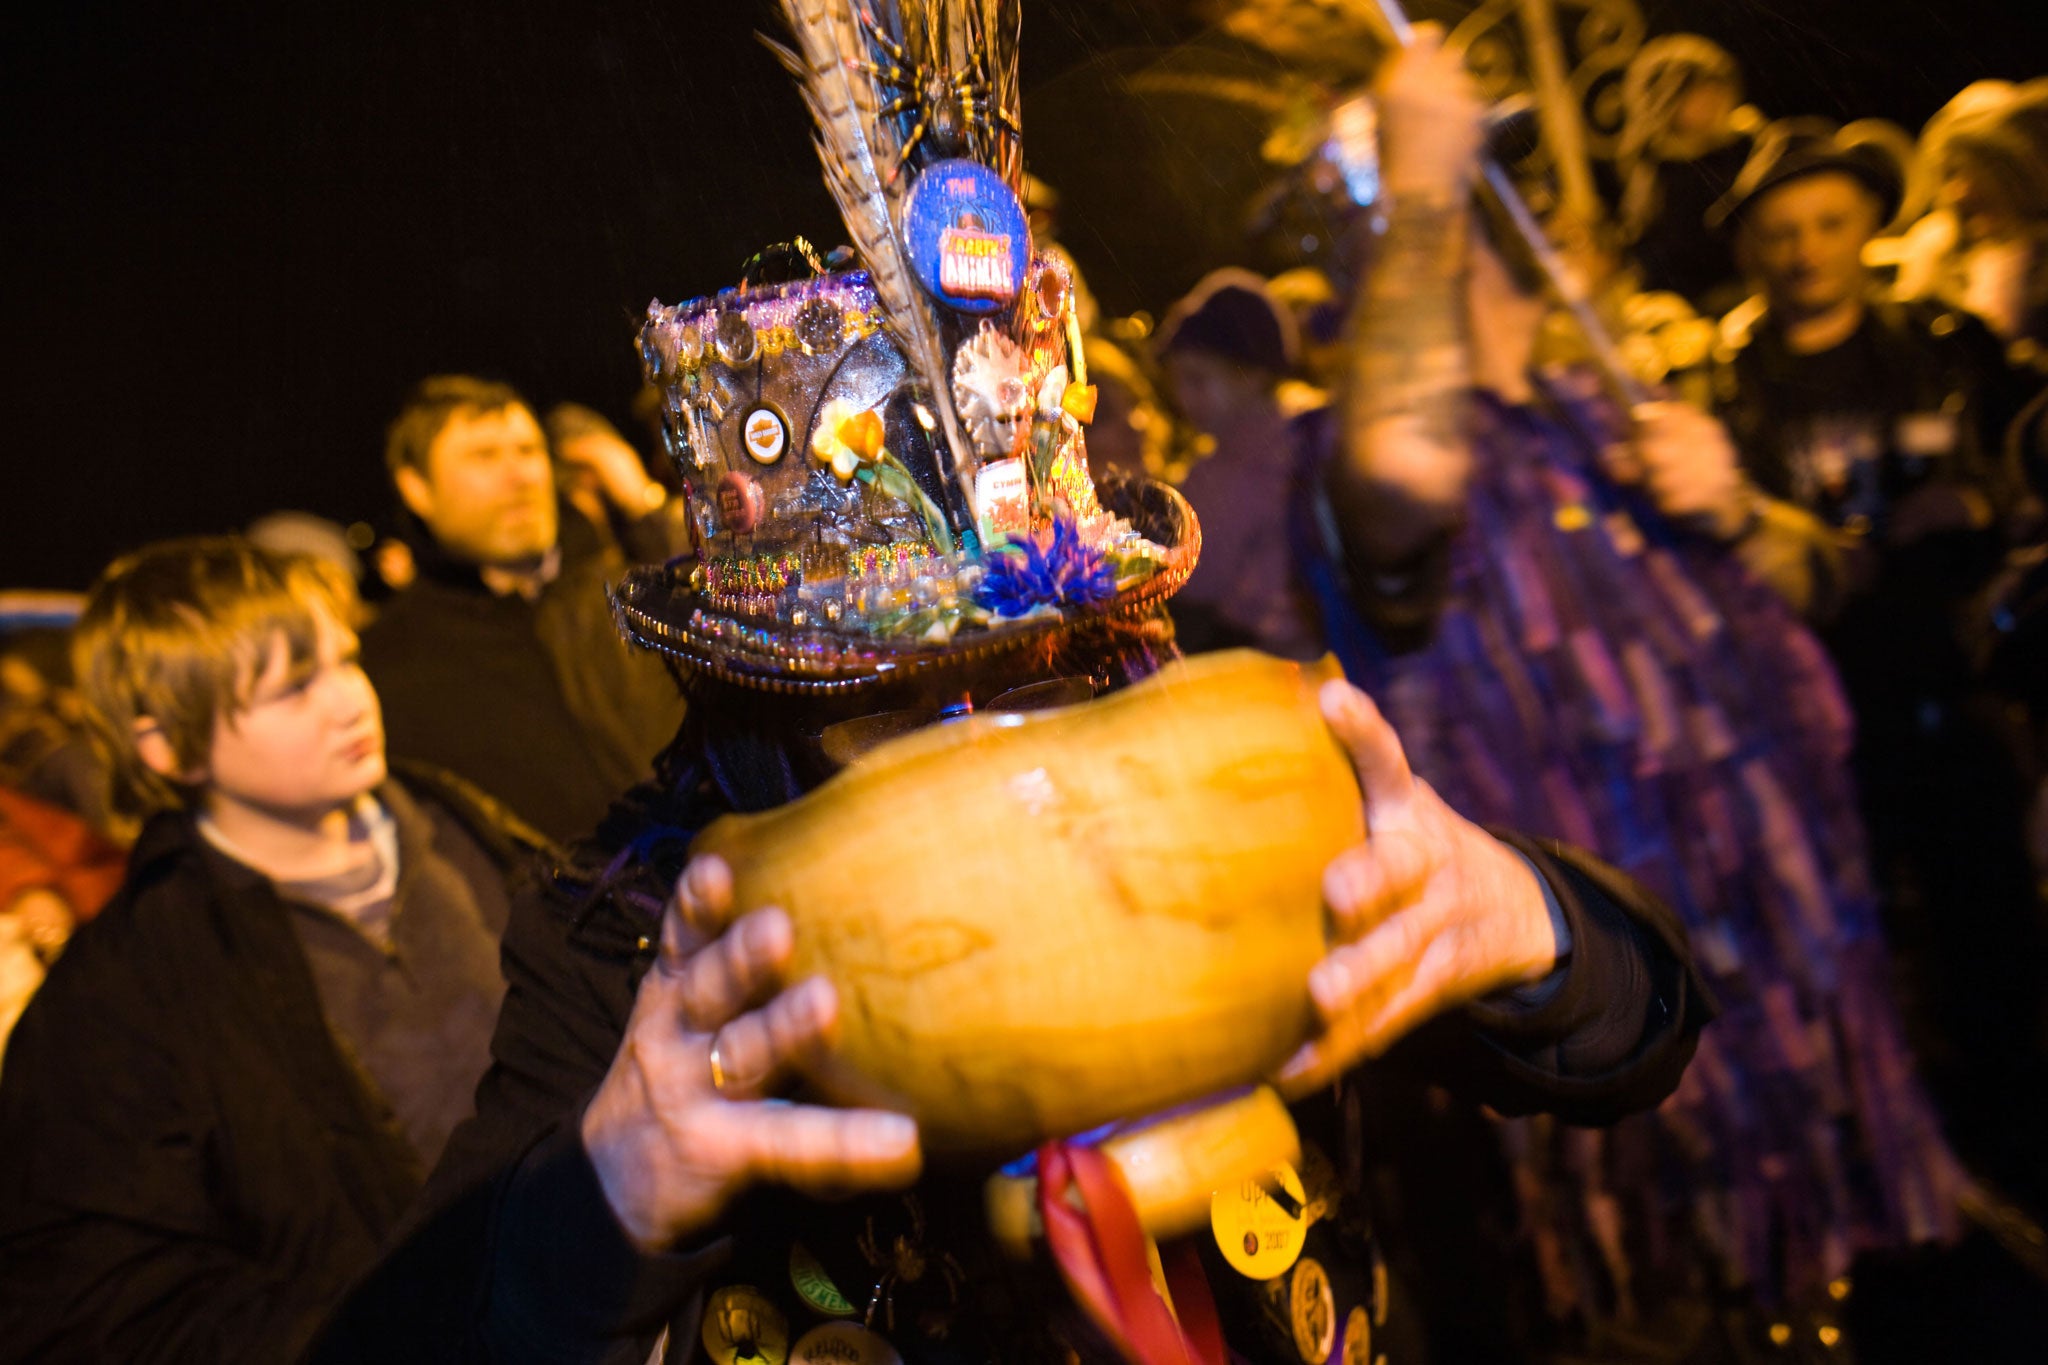 A reveller drinks from the wassail bowl at the Chepstow Wassail in Wales